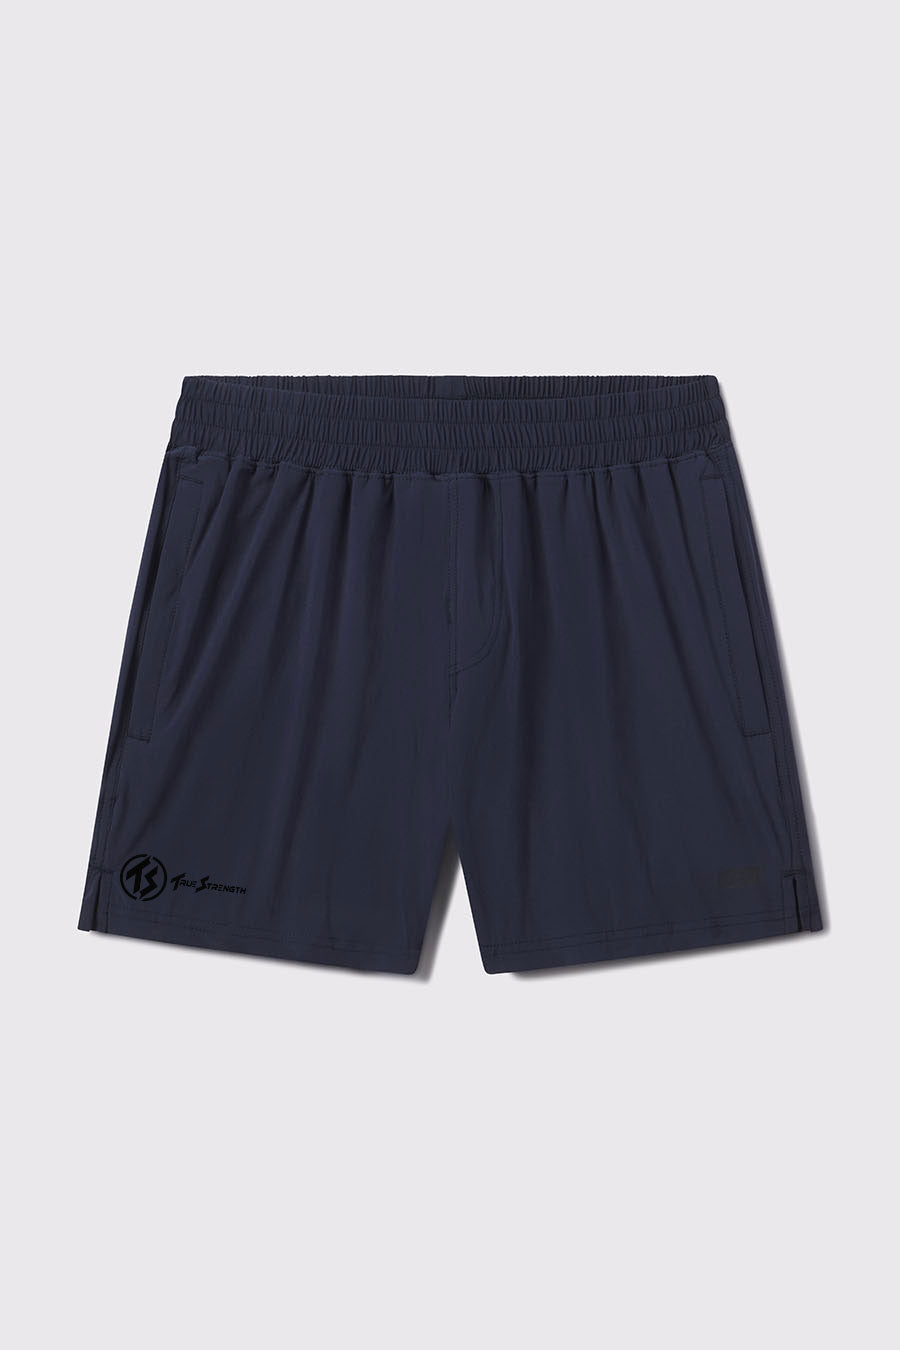 Shuck Ranger Short - Navy - photo from front flat lay #color_navy